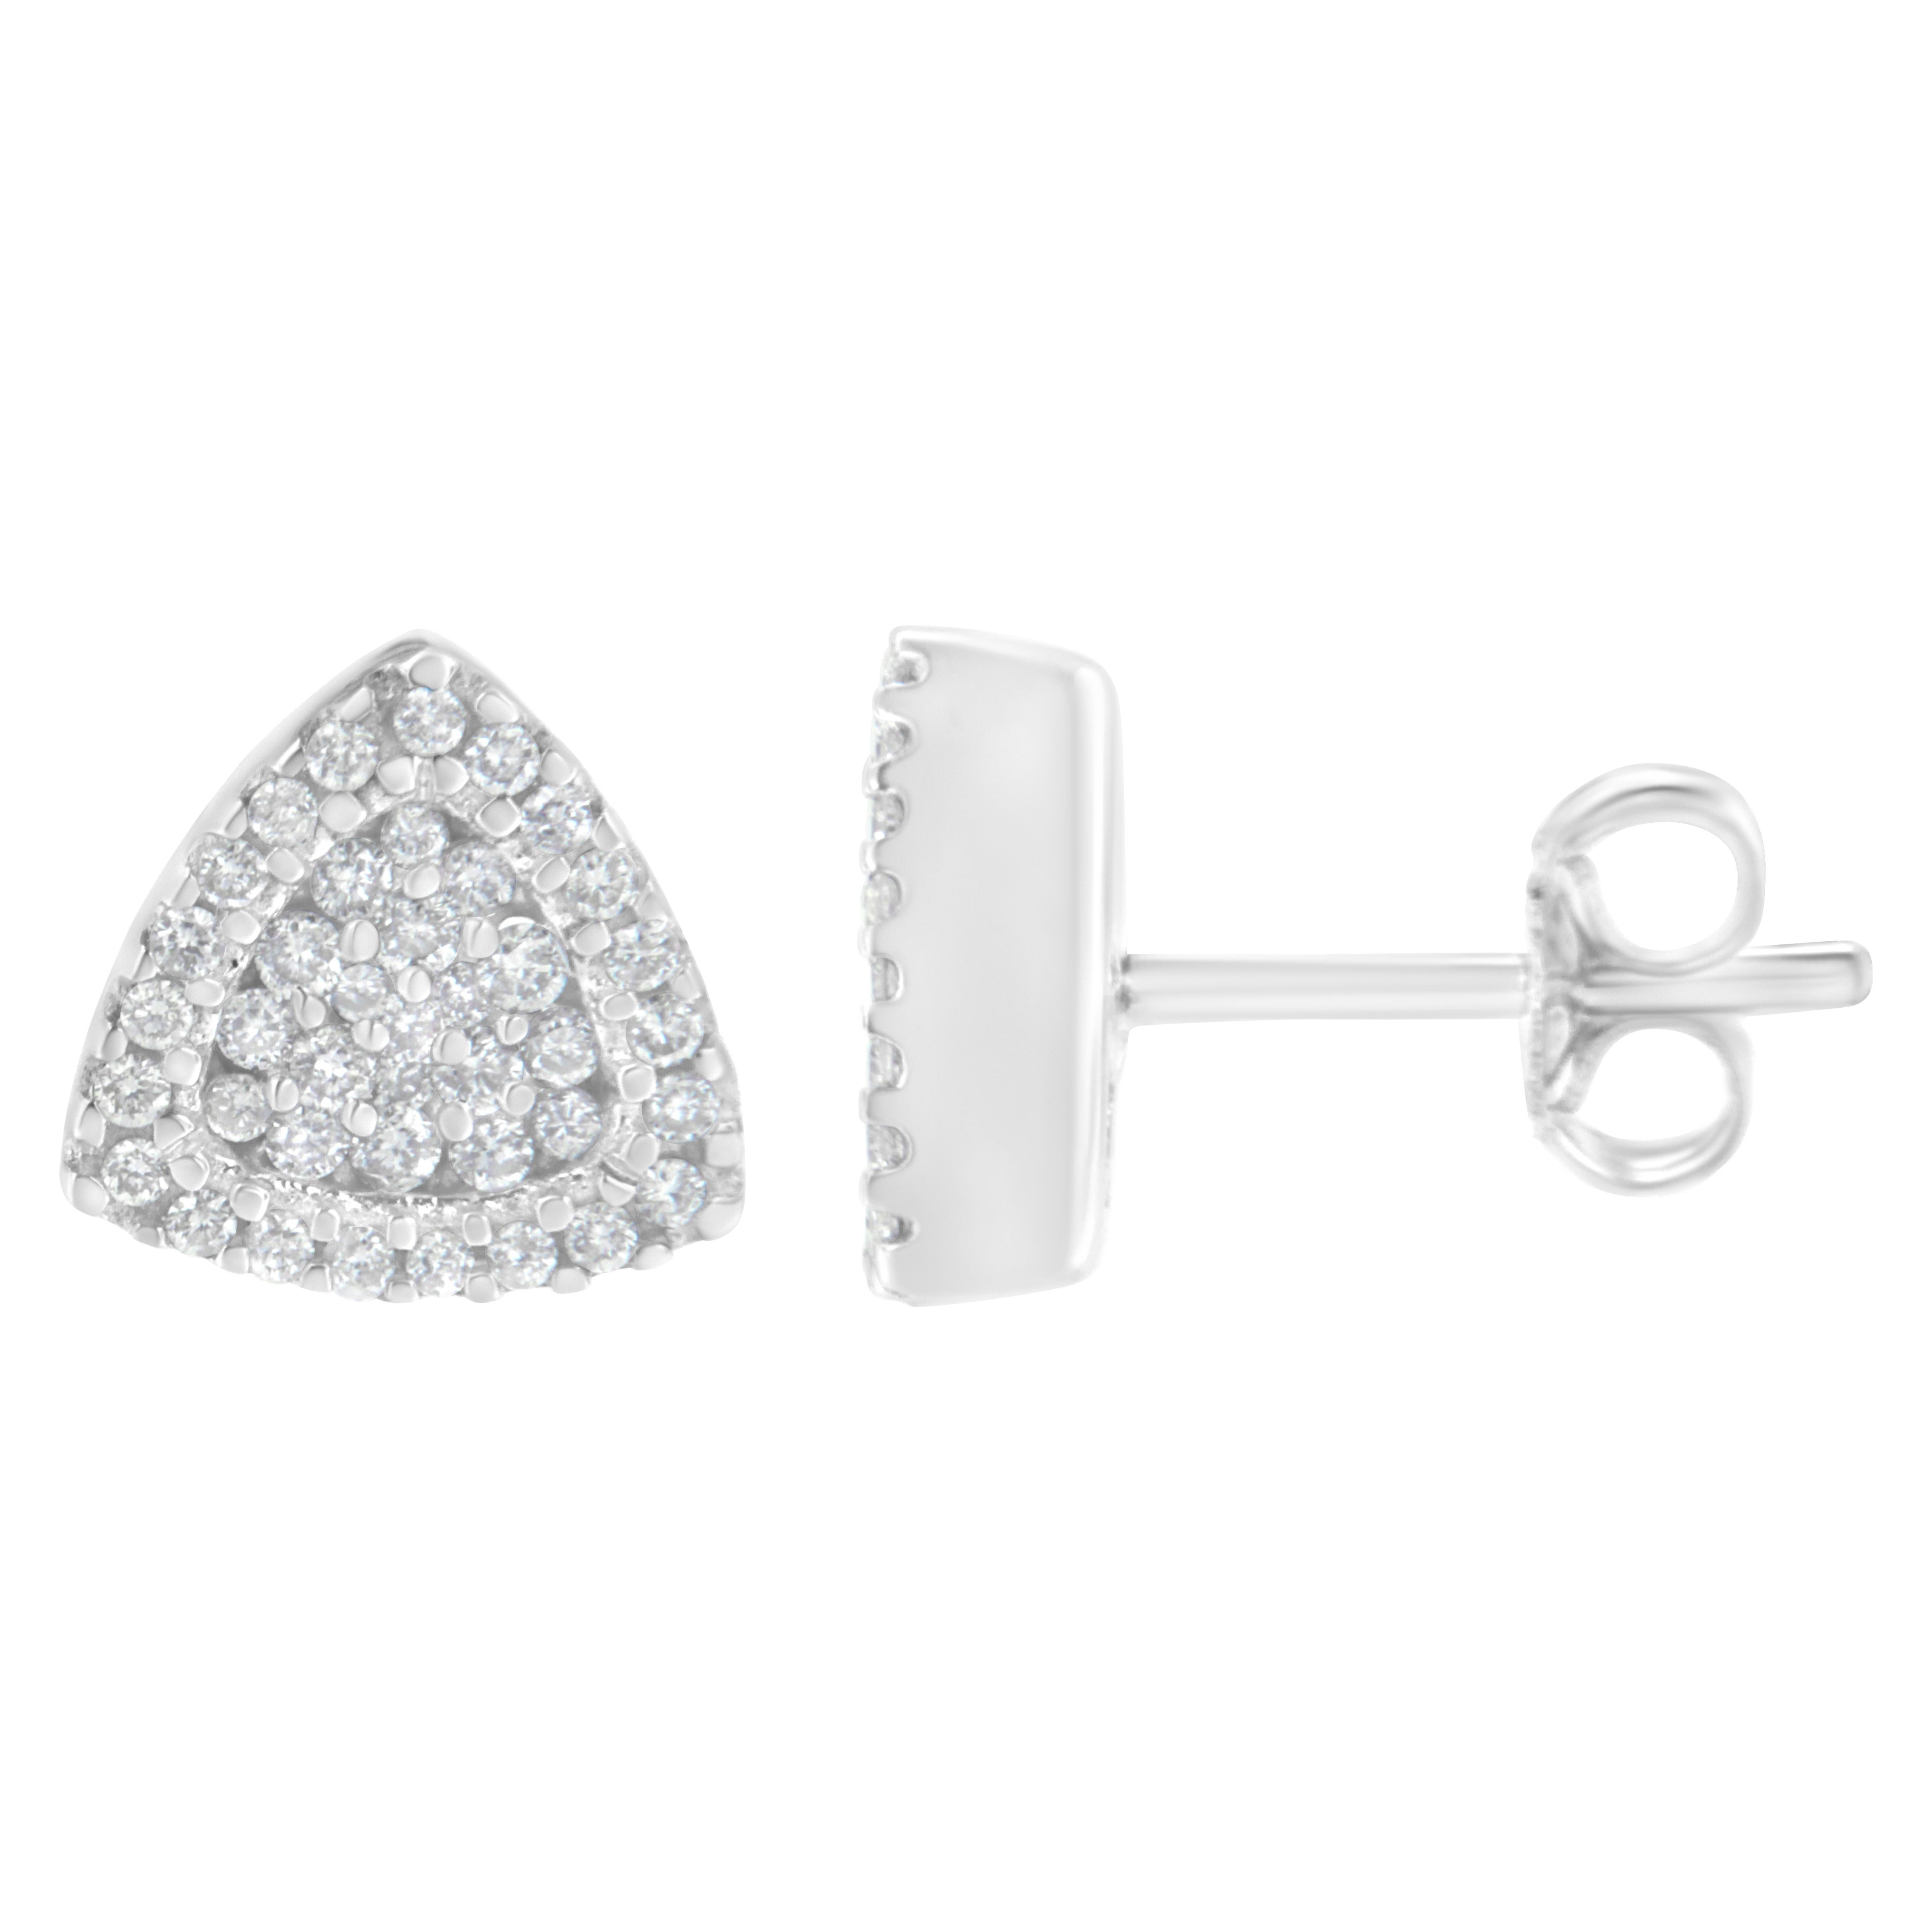 Let yourself be dazzled by these trillion shaped stud earrings. Made in 14k white gold, these earrings showcase 1/2 ct TDW in diamonds. A central diamond cluster is wrapped by a diamond halo. 80 round cut diamonds give this earring design its